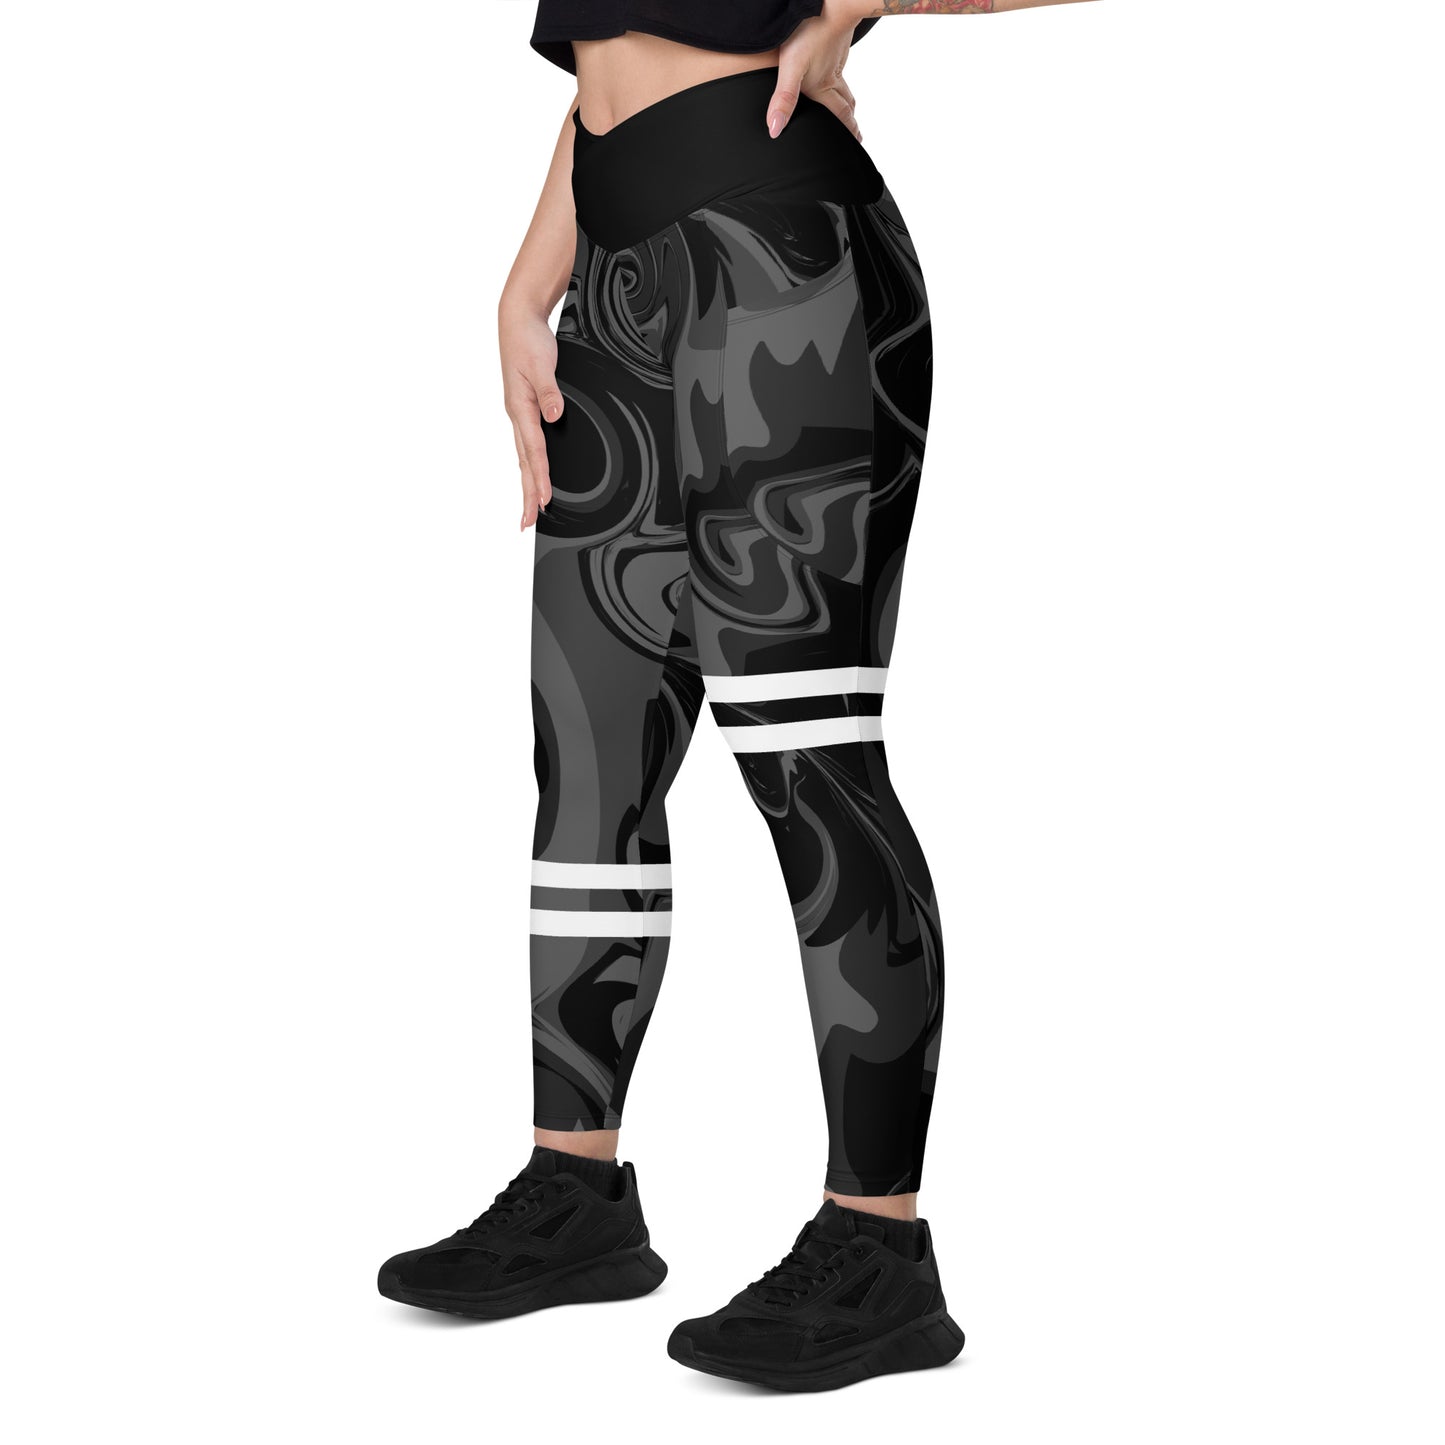 Black Marble Print High Waist Crossover leggings with pockets